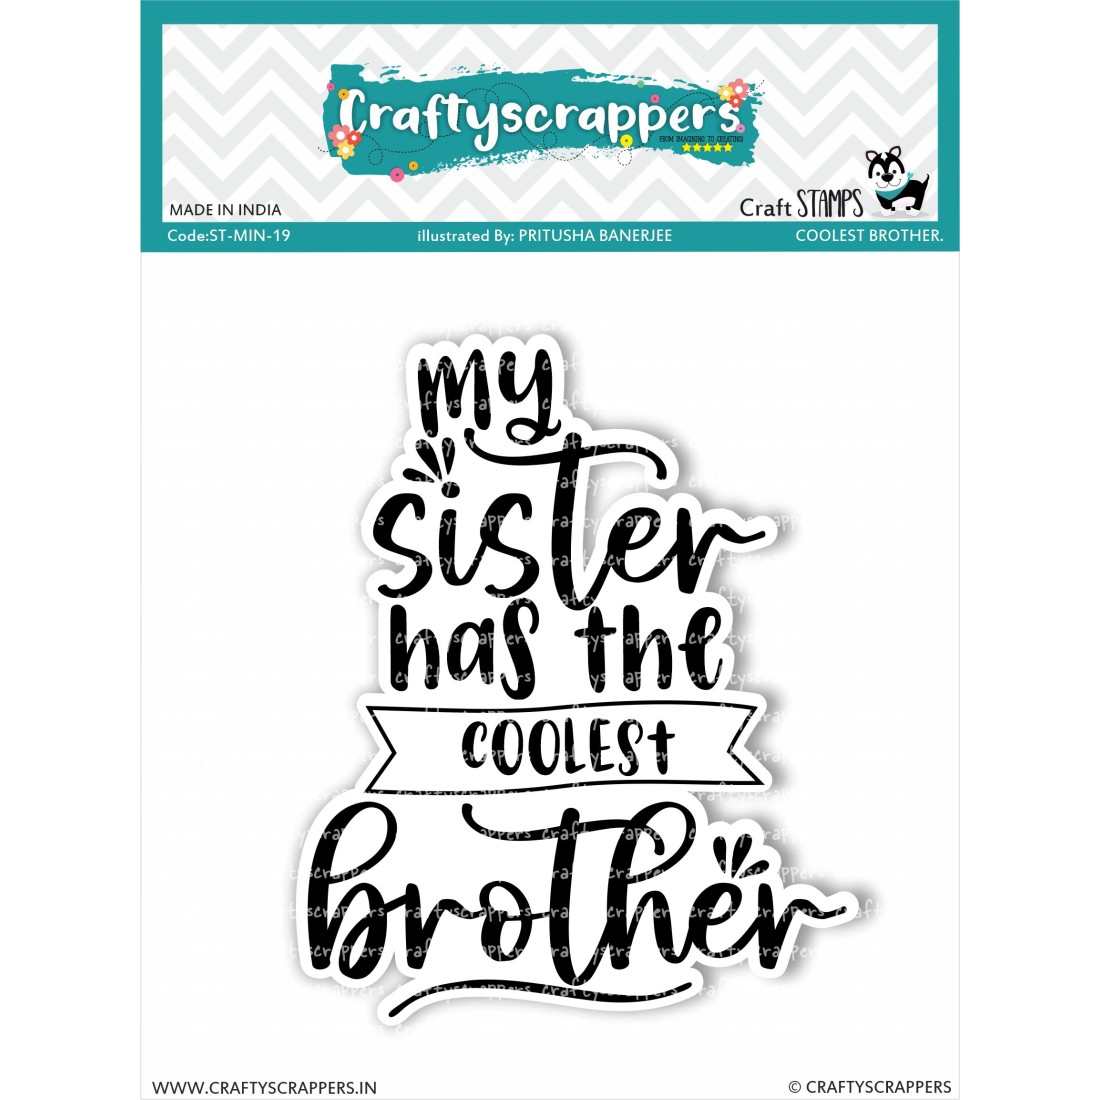 Craftyscrappers Mini Stamps- COOLEST BROTHER